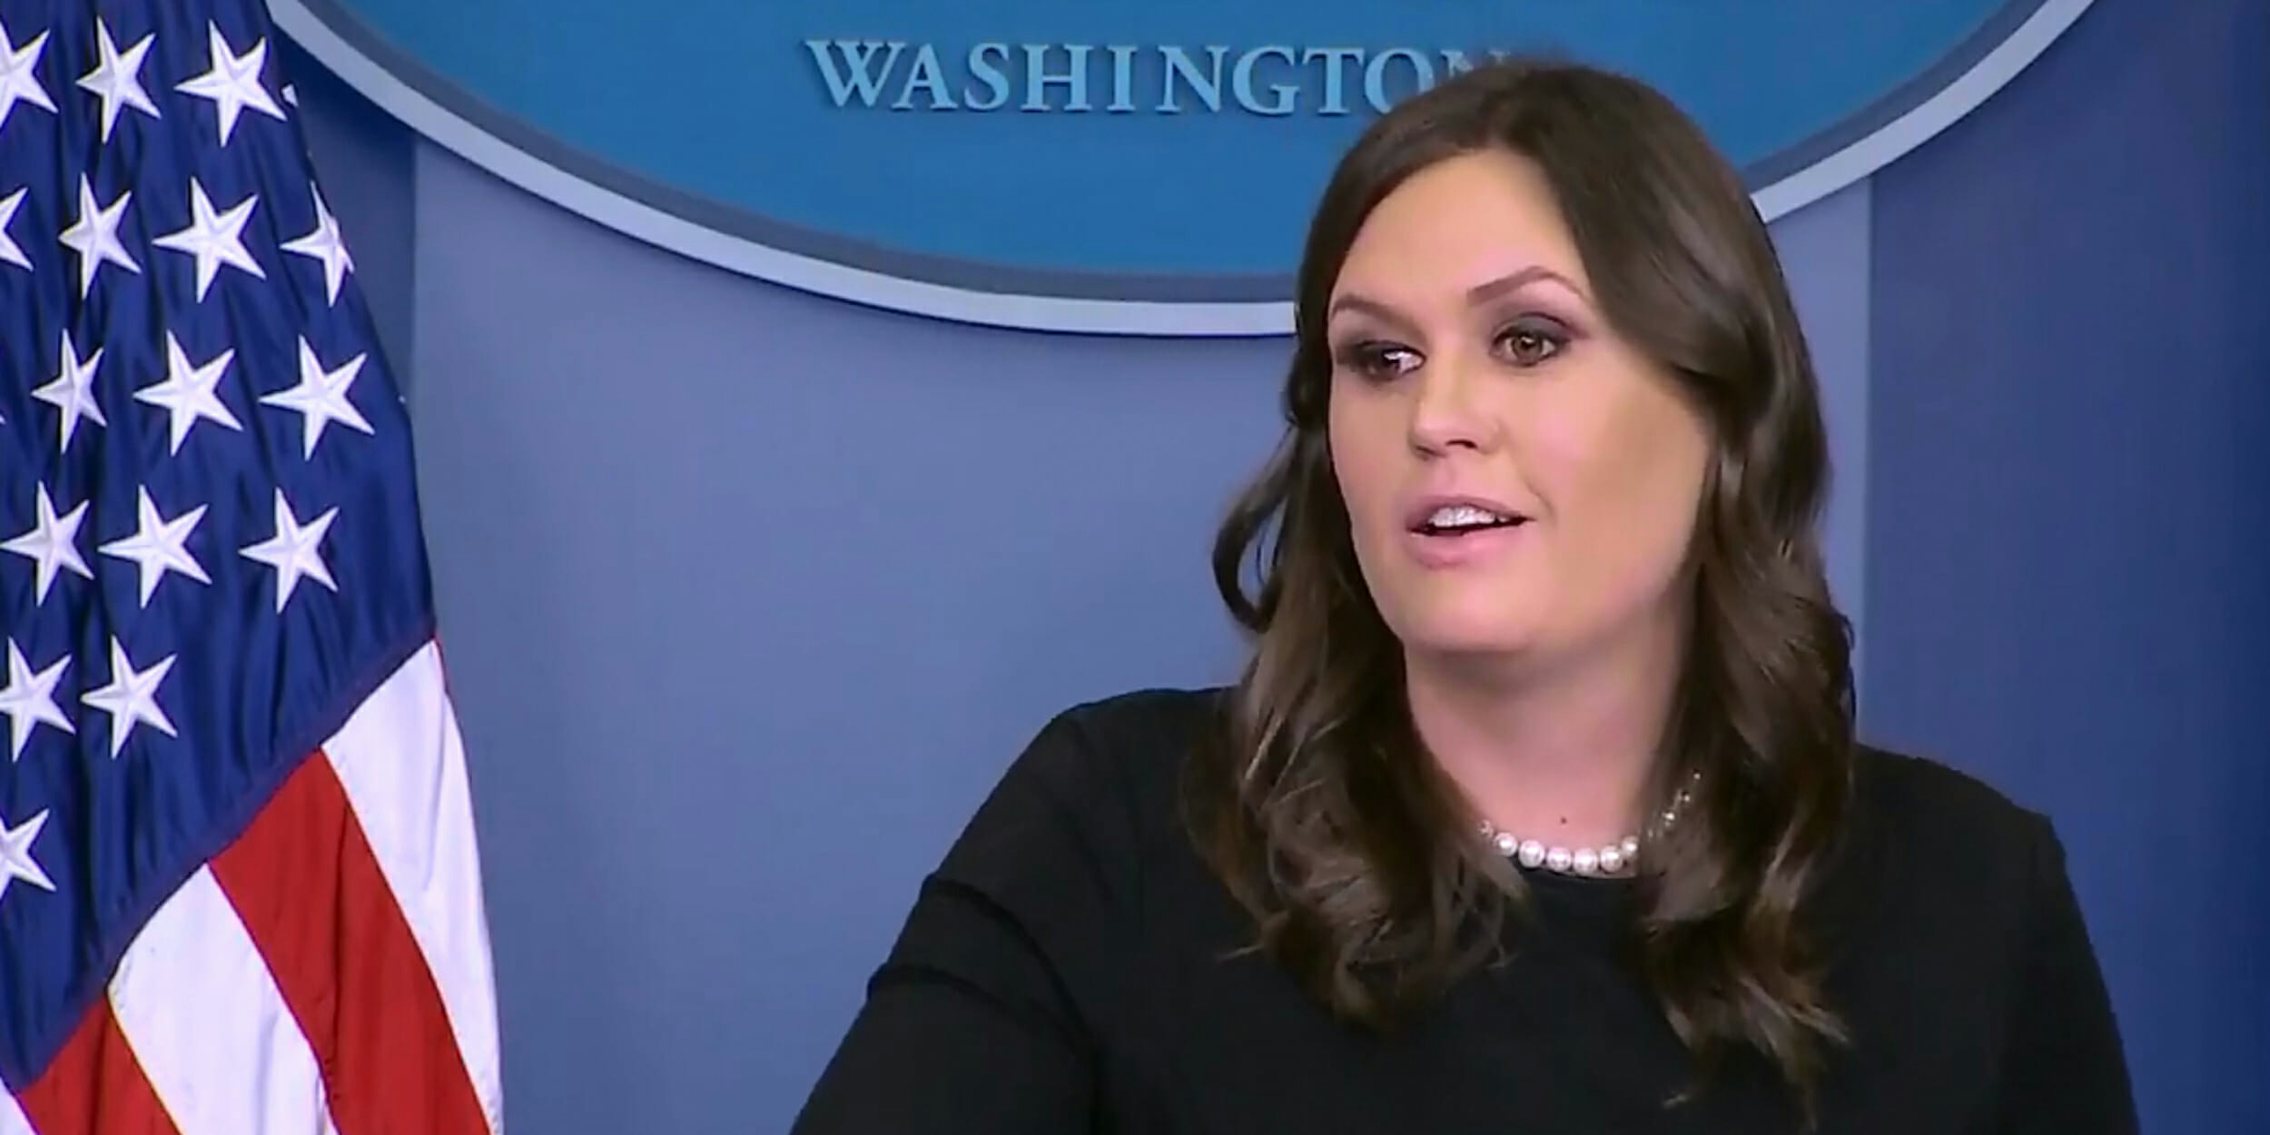 White House Press Secretary Sarah Huckabee Sanders claimed she was barred service from a Virginia restaurant because of her affiliation with the Trump administration.